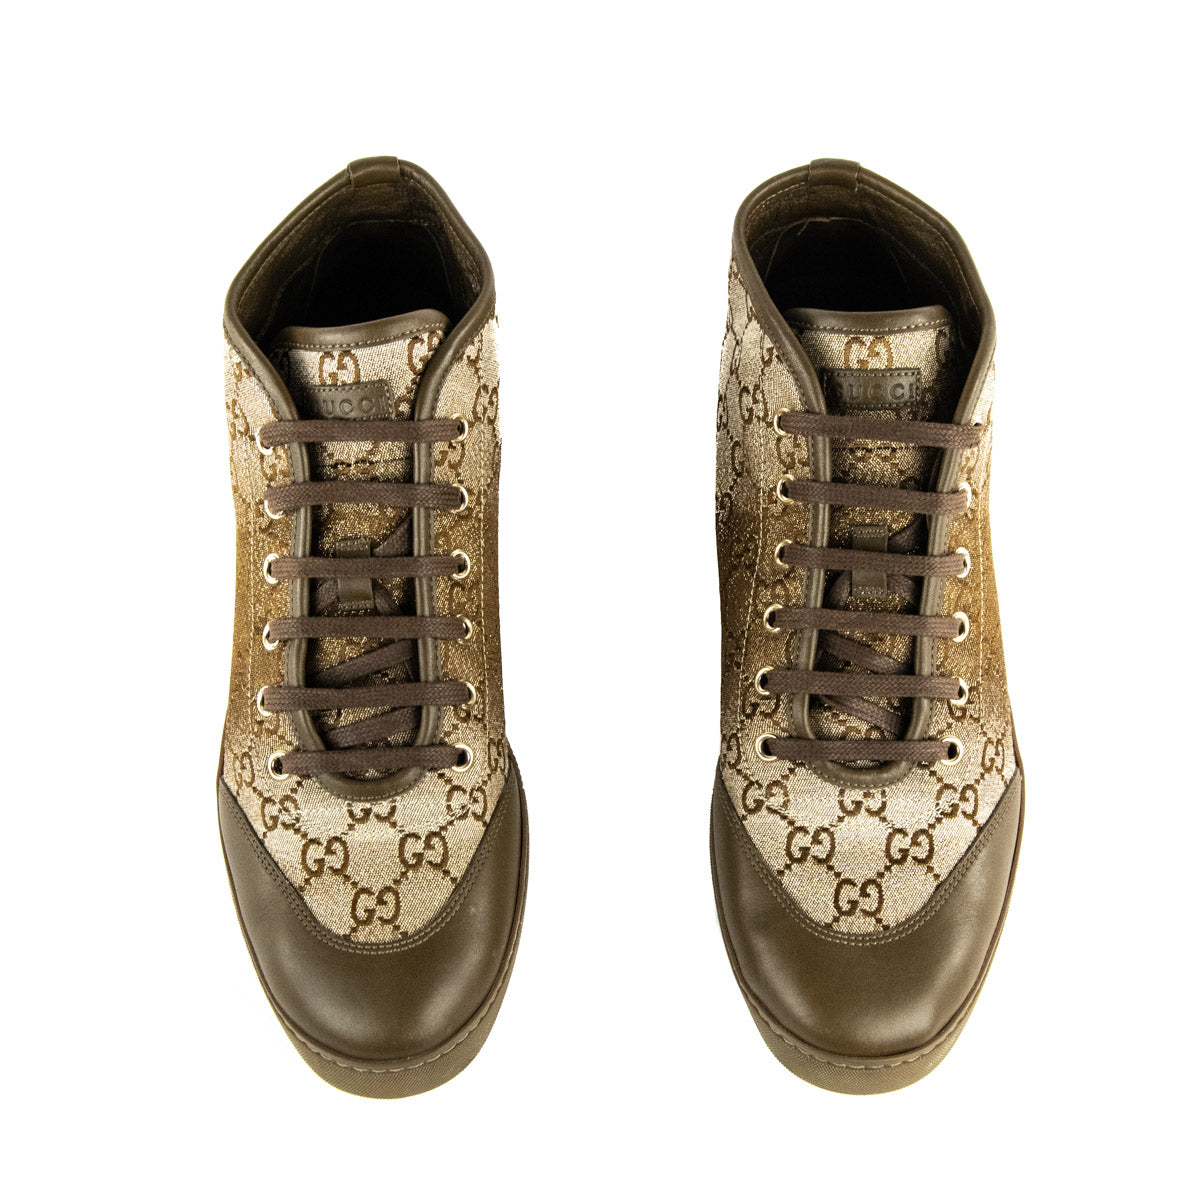 Gucci GG Supreme Charm Embellished High Top Sneakers Size US 11.5 | EU 41.5 - Love that Bag etc - Preowned Authentic Designer Handbags & Preloved Fashions